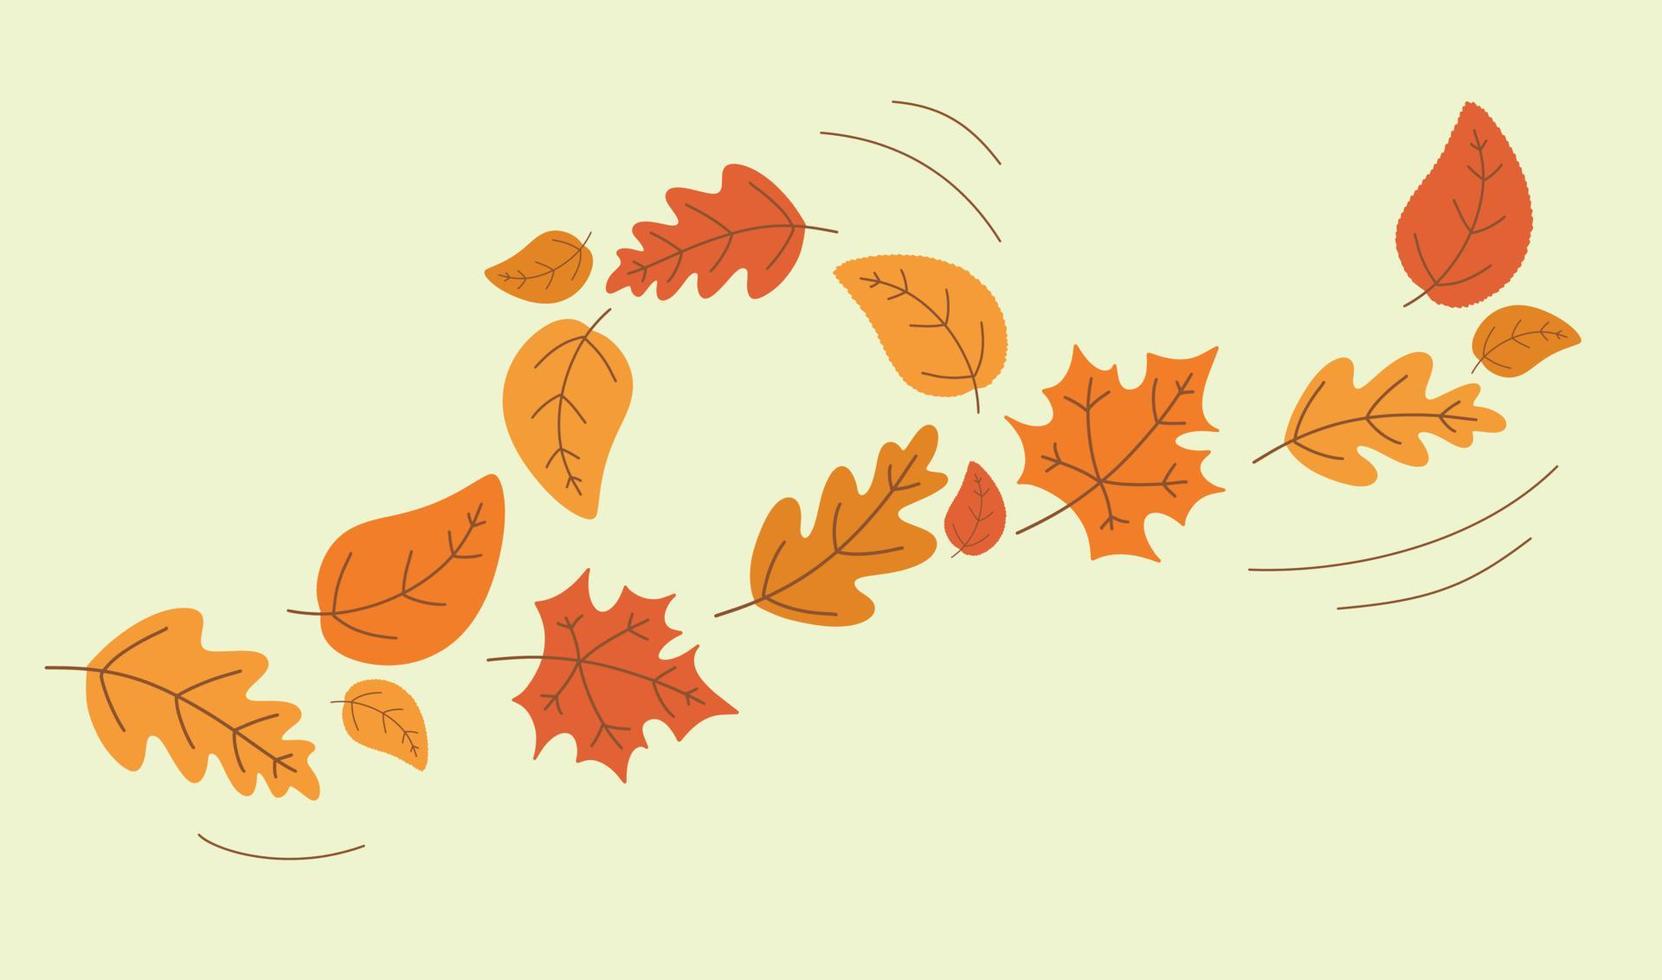 Fall of colorful autumn leaves. Yellowed oak and maple leaves swirl in the wind. Seasonal vector illustration. Template for decorative design.